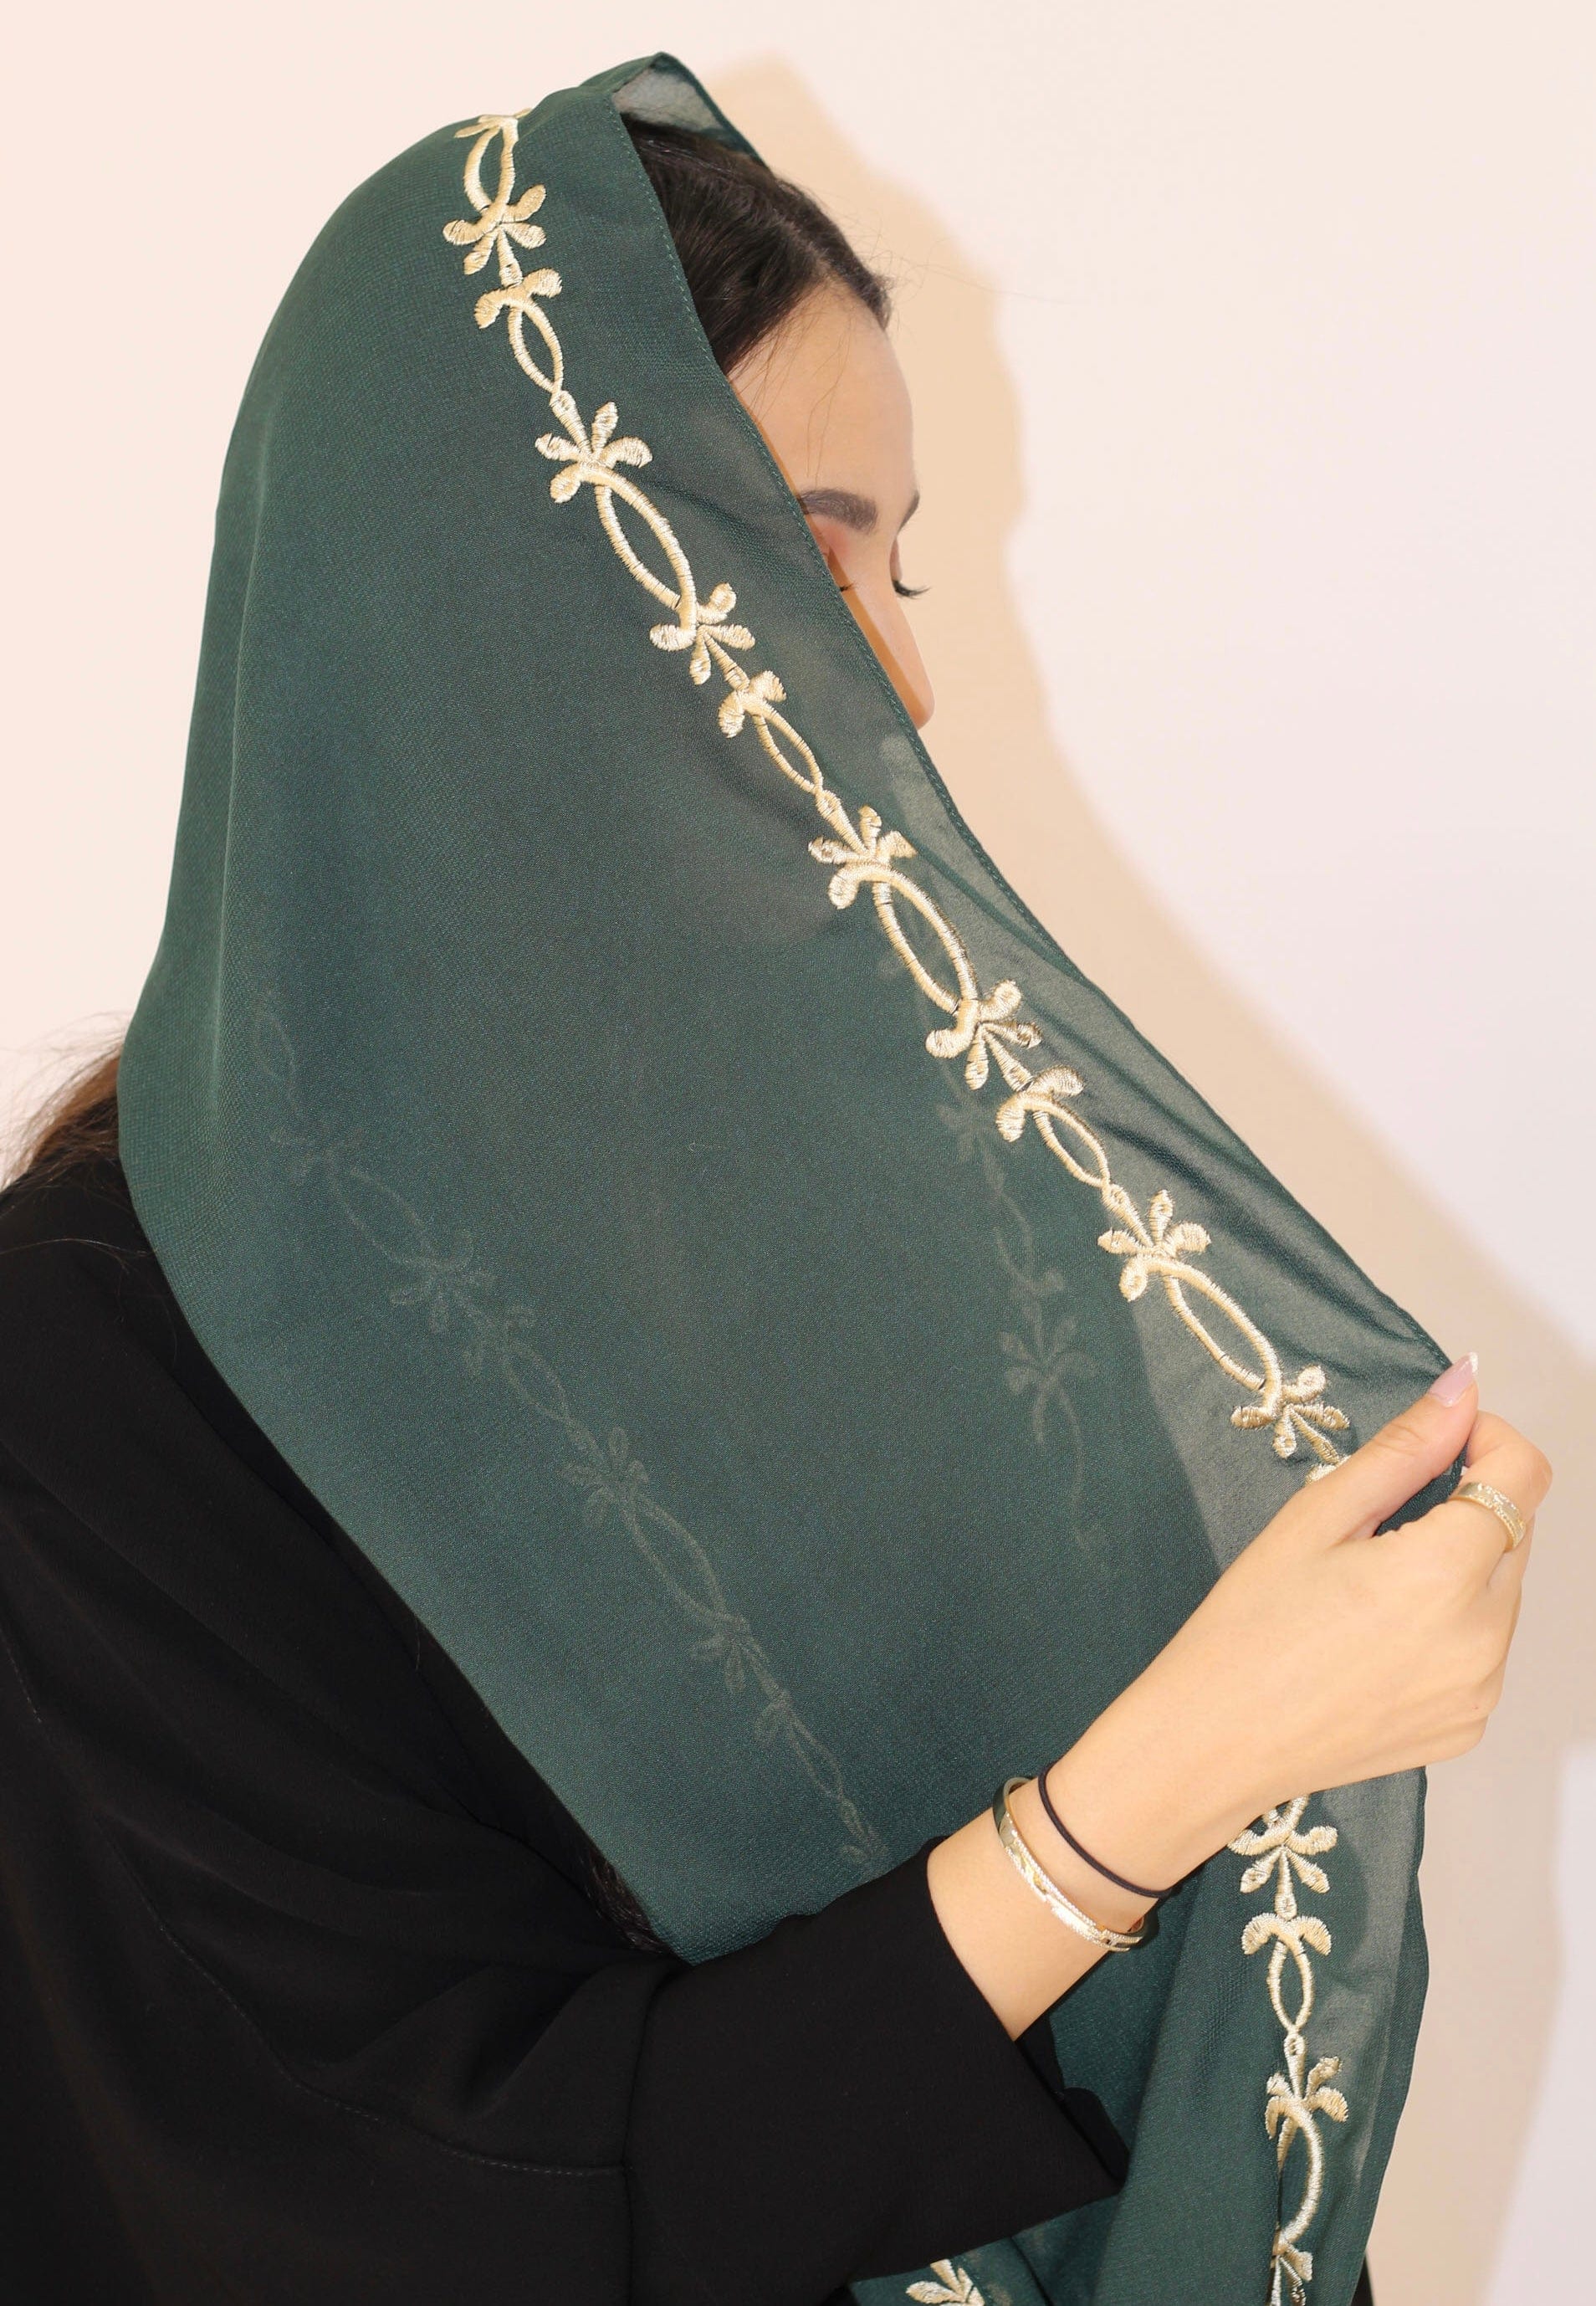 TA-233 Dark green hijab with golden embroidery